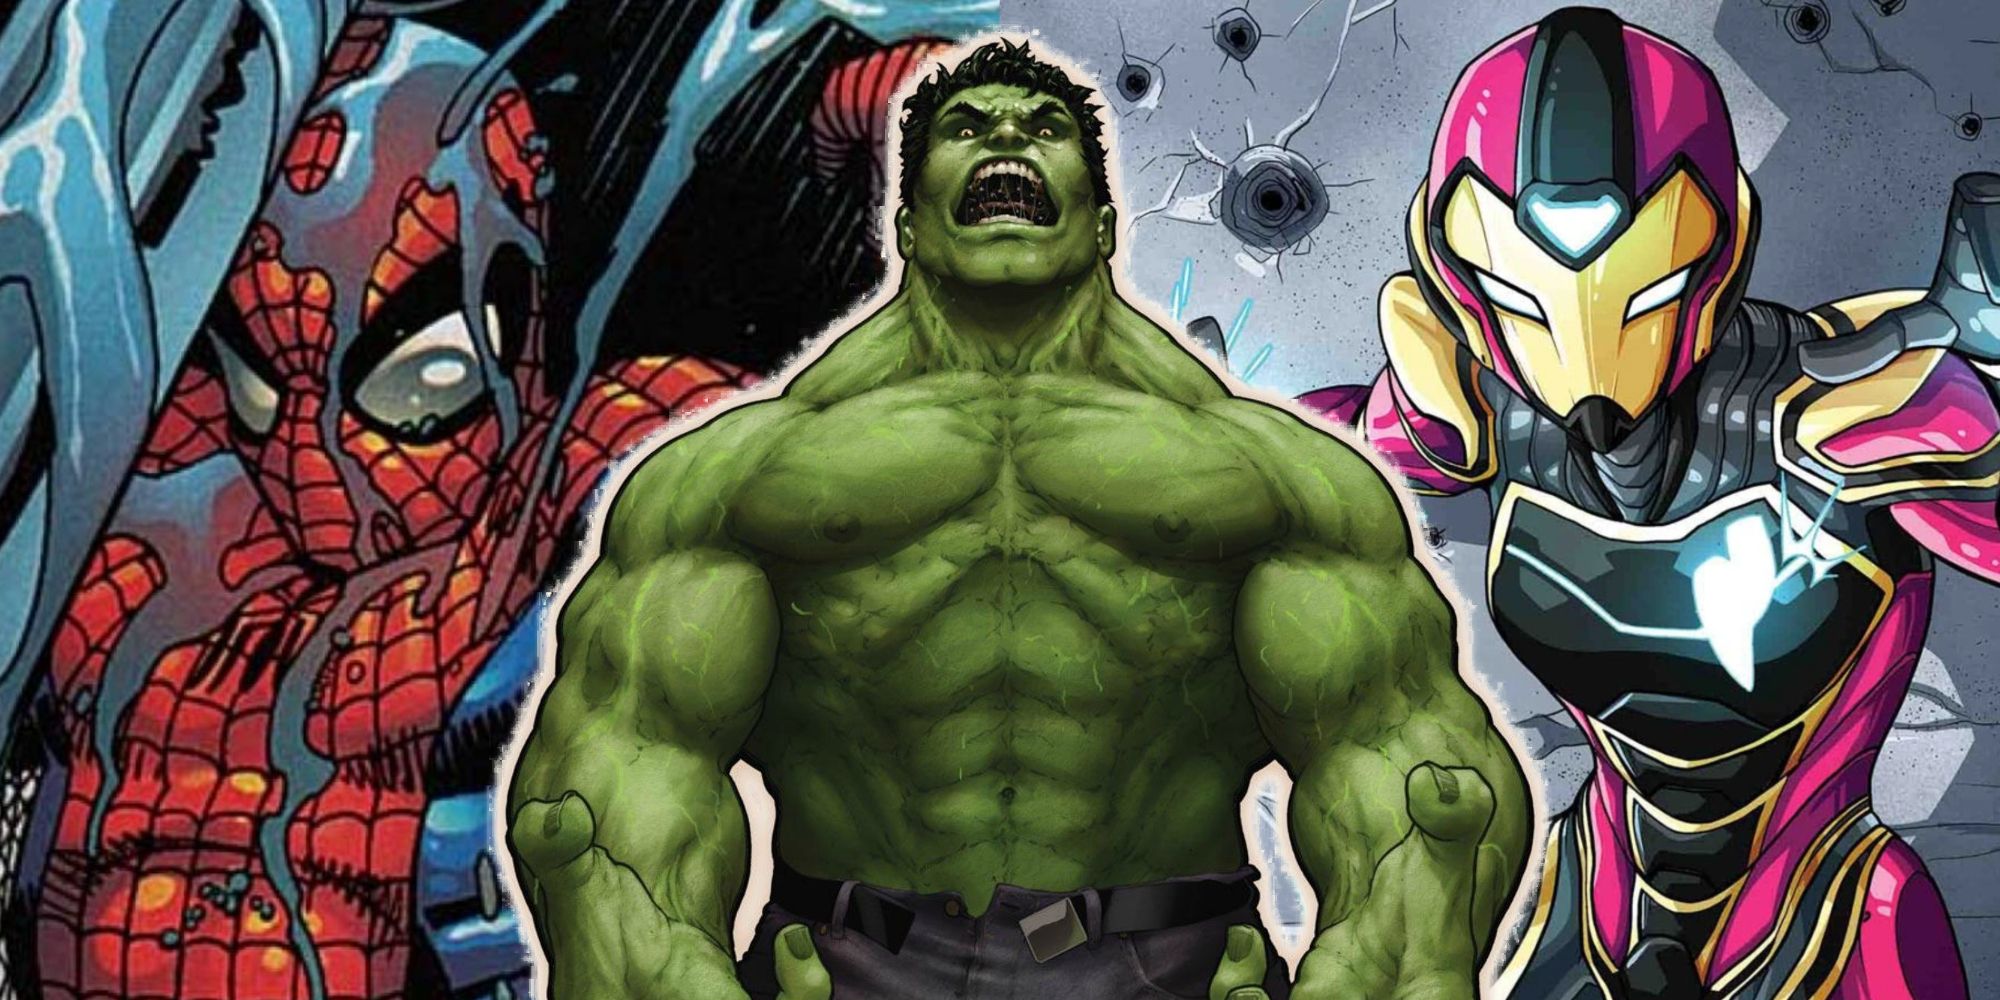 Split image of Spider-Man, Ironheart, and the Hulk in Marvel Comics